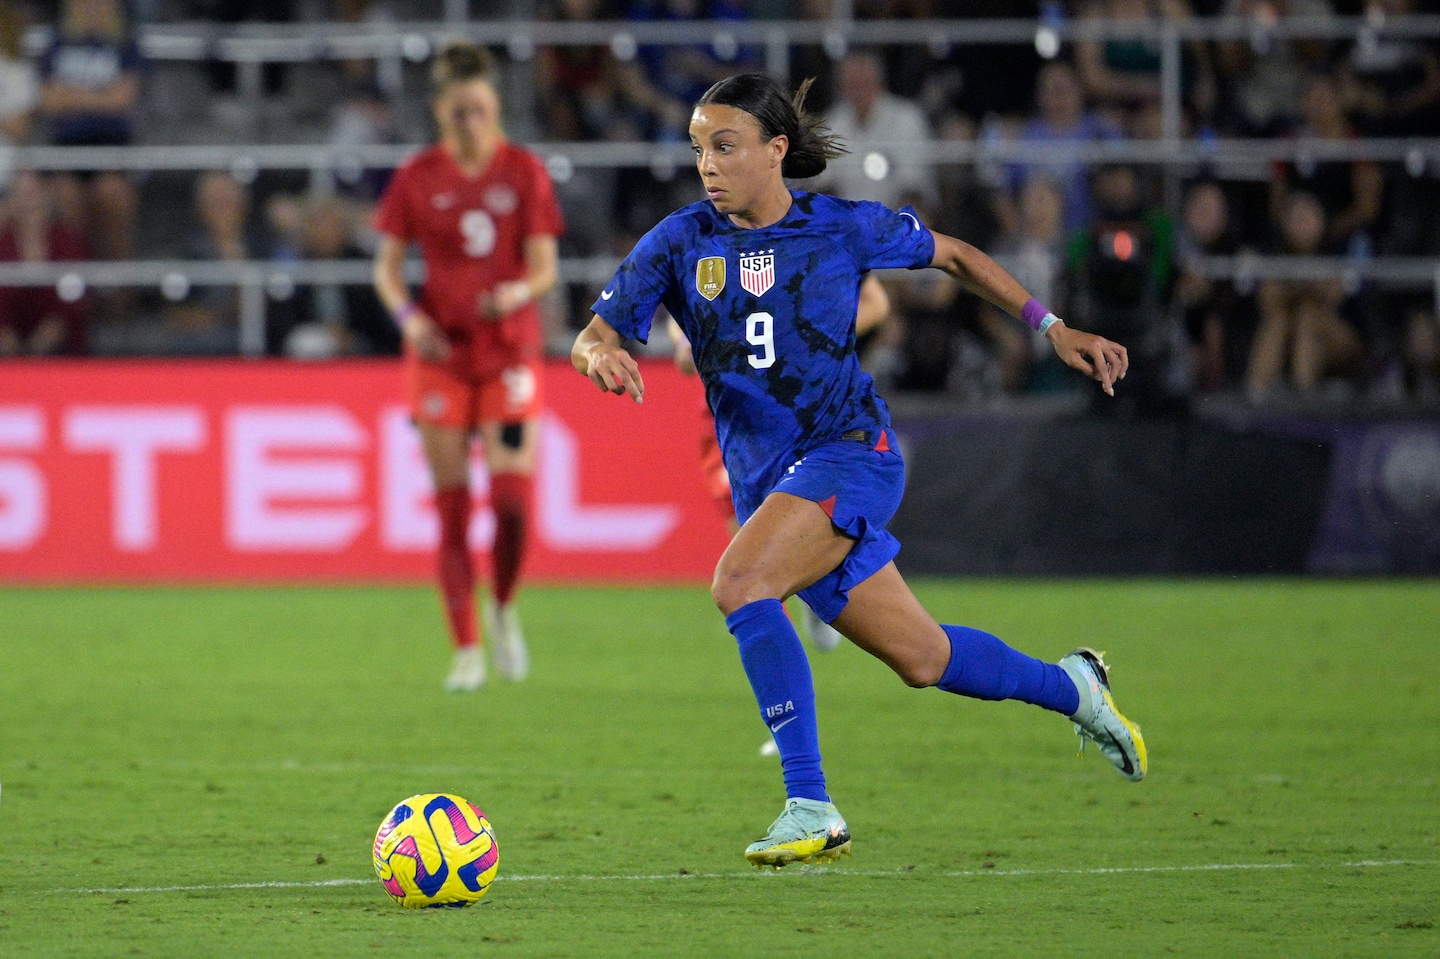 Mallory Swanson and Catarina Macario return to USWNT after long injury absences